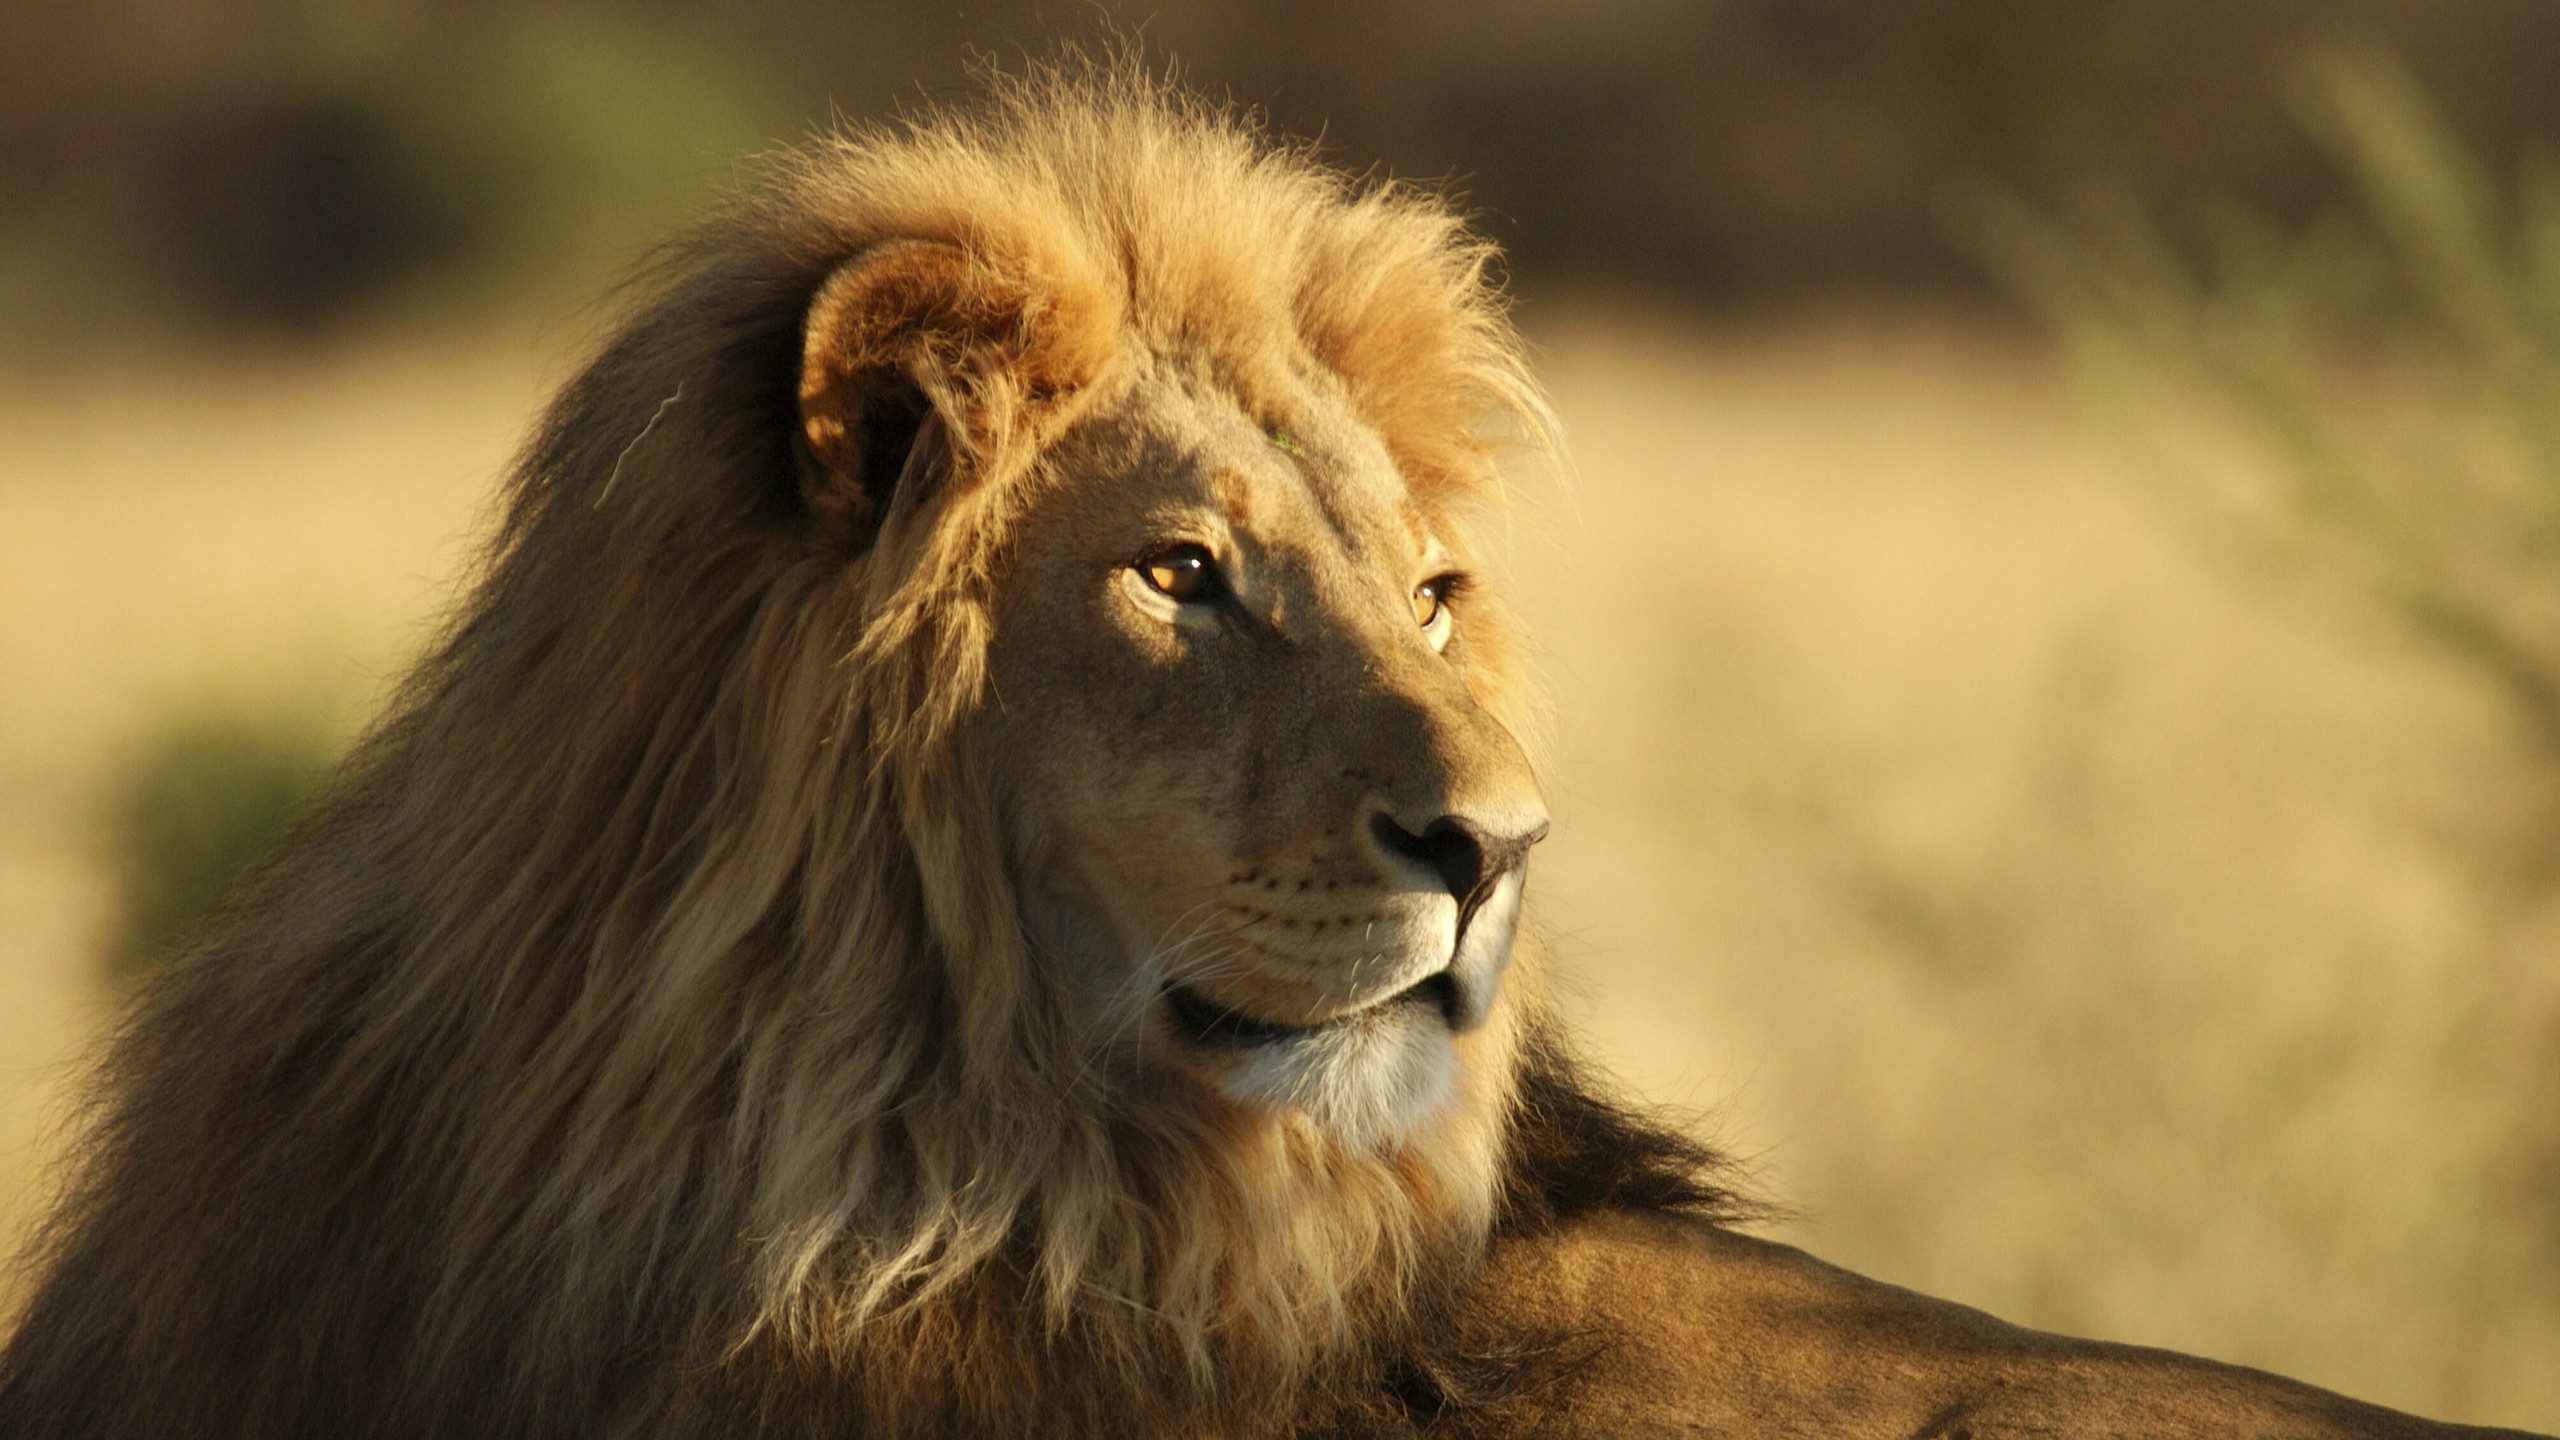 Brown Lion in Close up Photography During Daytime. Wallpaper in 2560x1440 Resolution